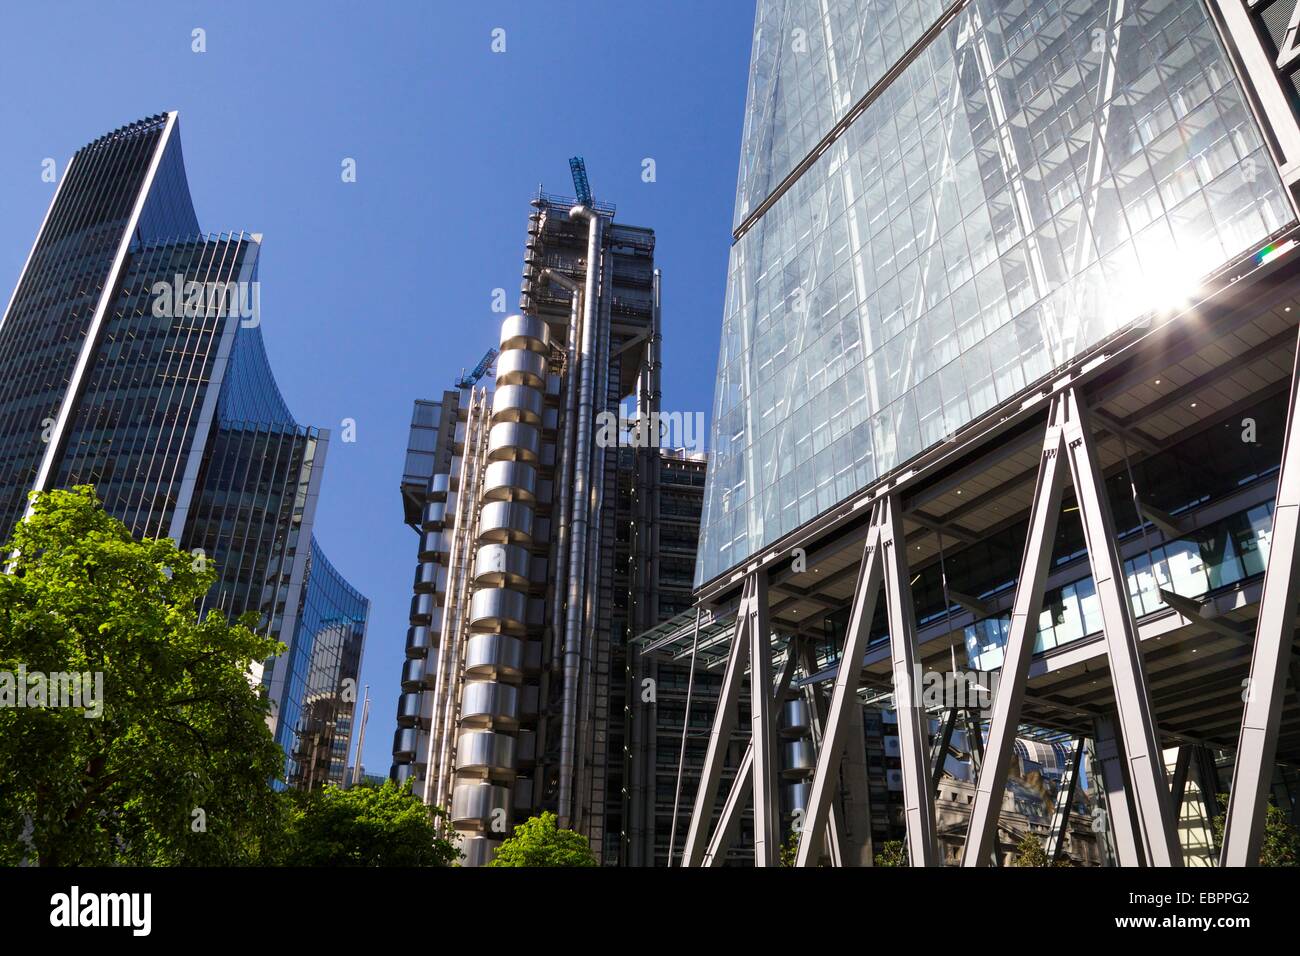 Lloyds, Willis and Cheese Grater buildings, financial district, City of London, England, United Kingdom, Europe Stock Photo